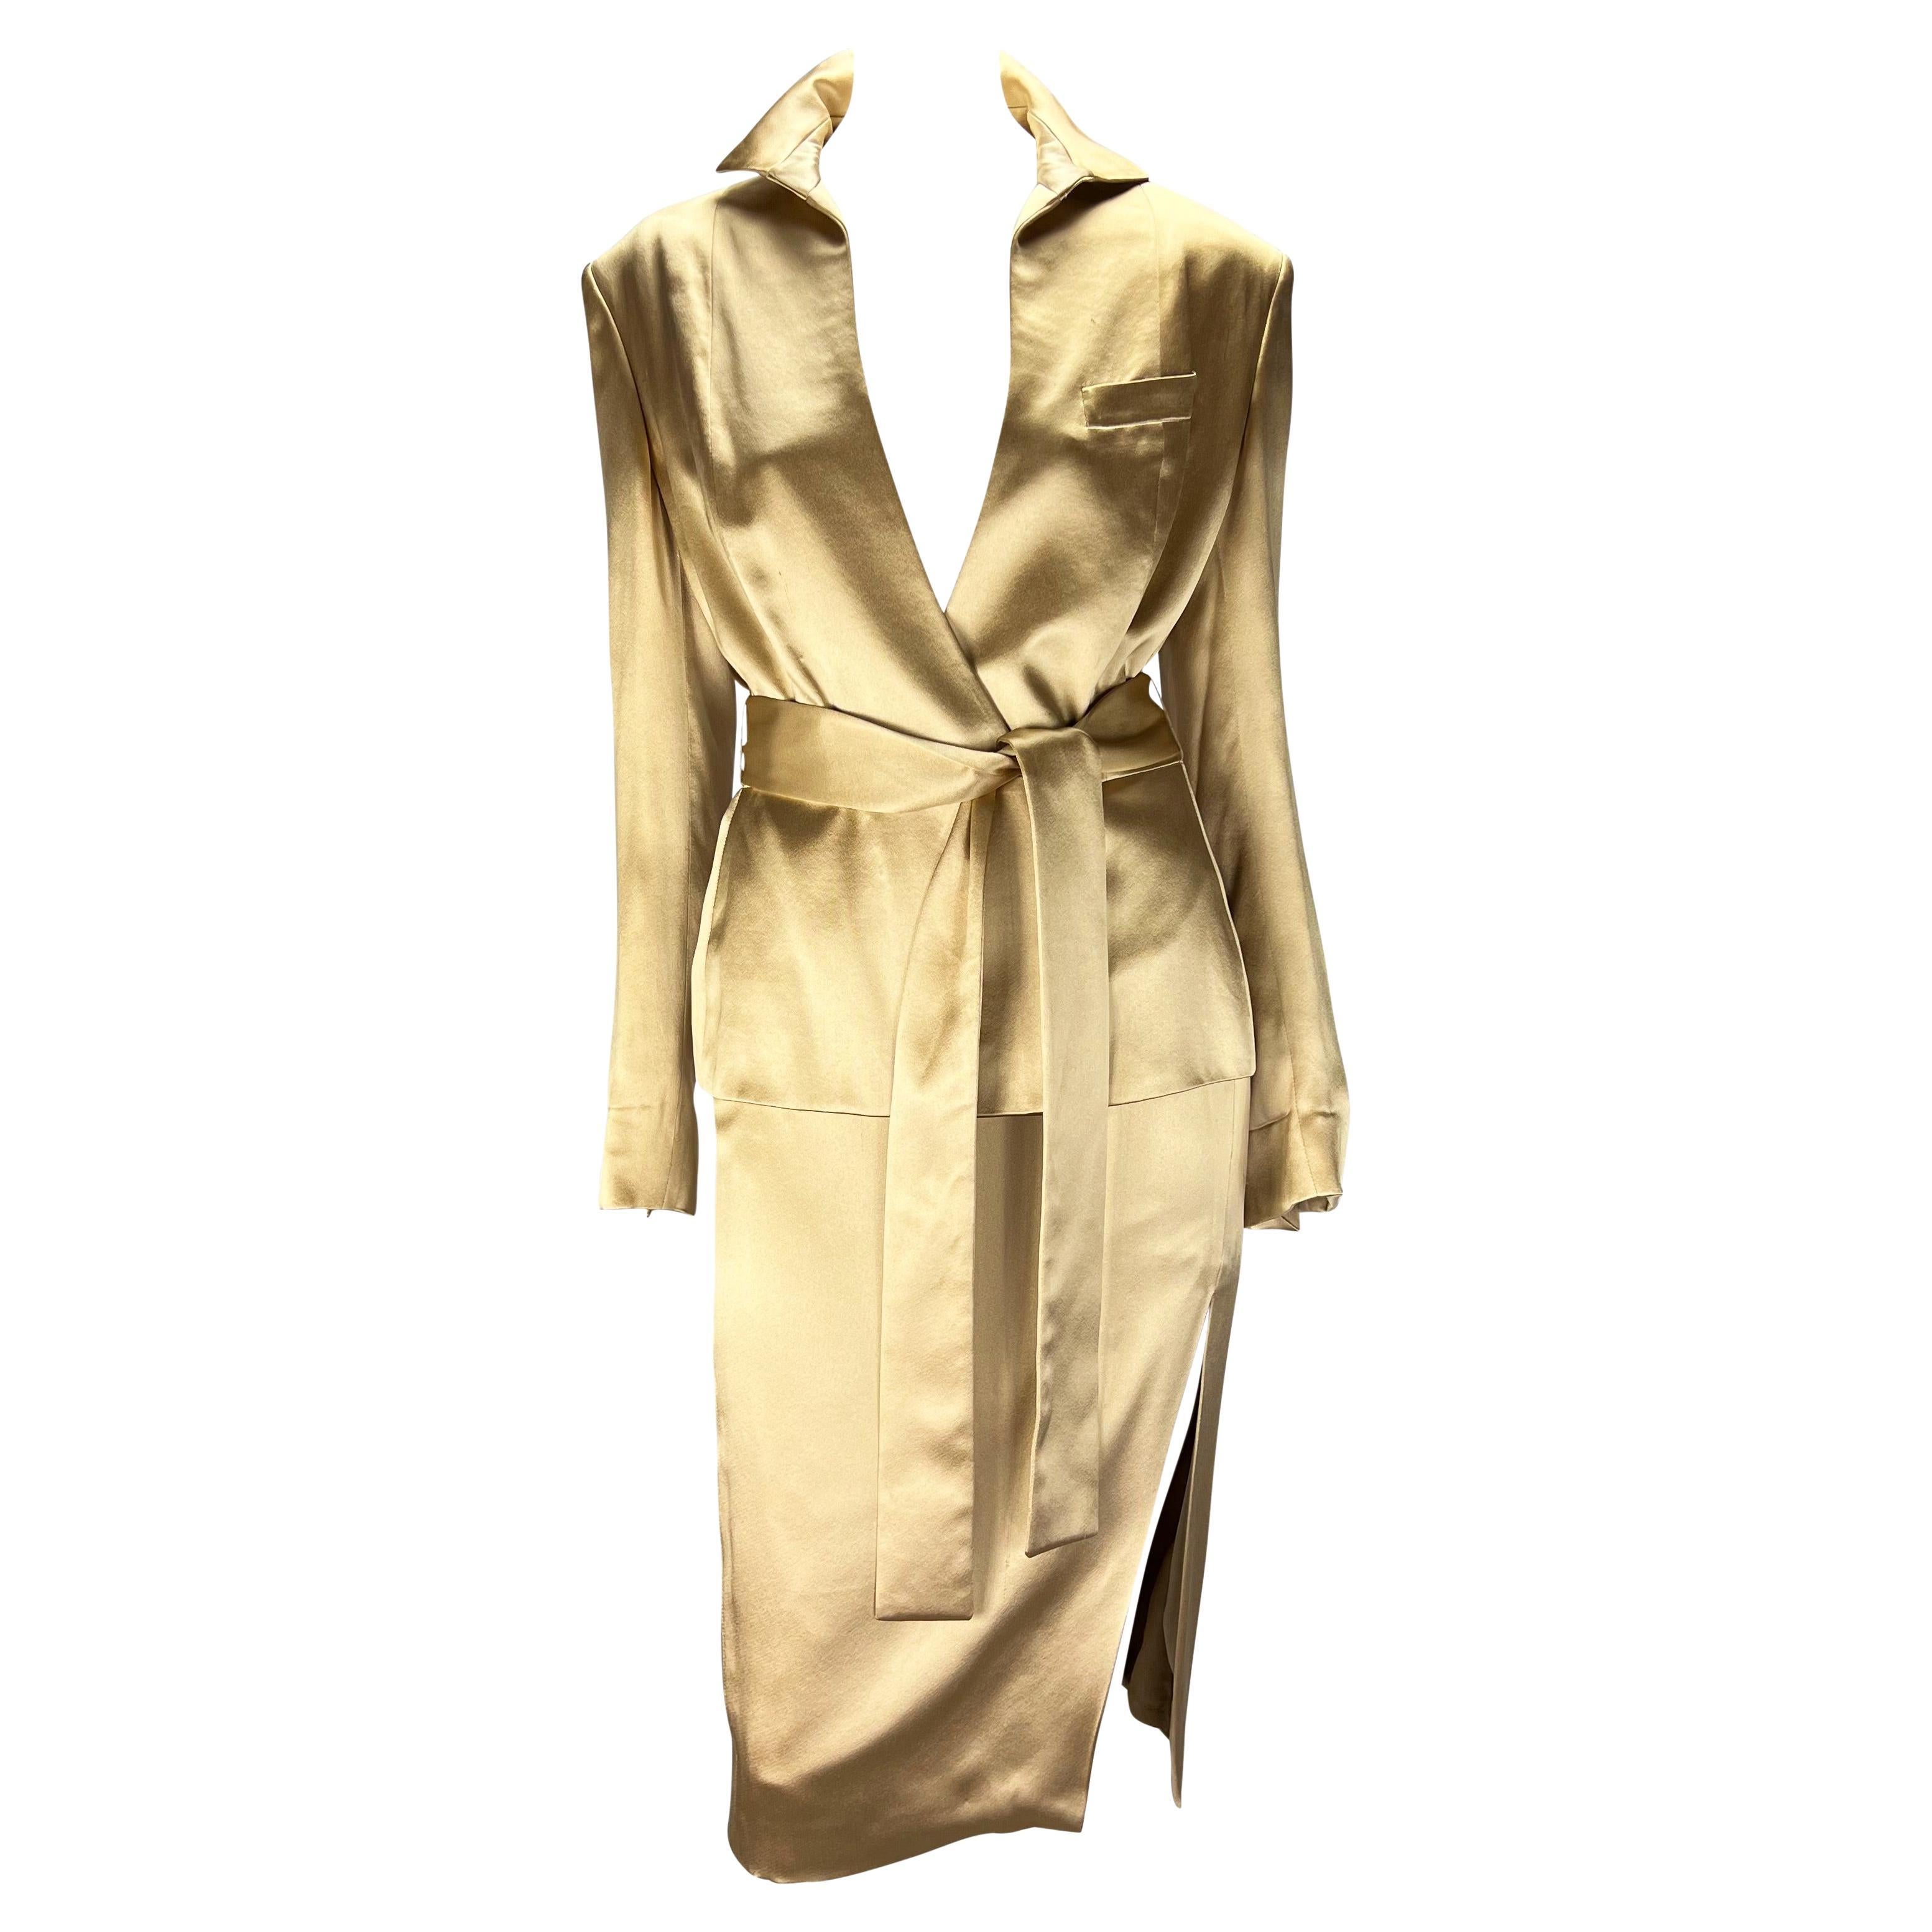 TheRealList presents: an absolutely stunning champagne silk satin Gucci skirt set, designed by Tom Ford. A sample set from the Spring/Summer 2001 collection, this two-piece set is made up of a pencil skirt and matching wrap jacket. Both pieces are